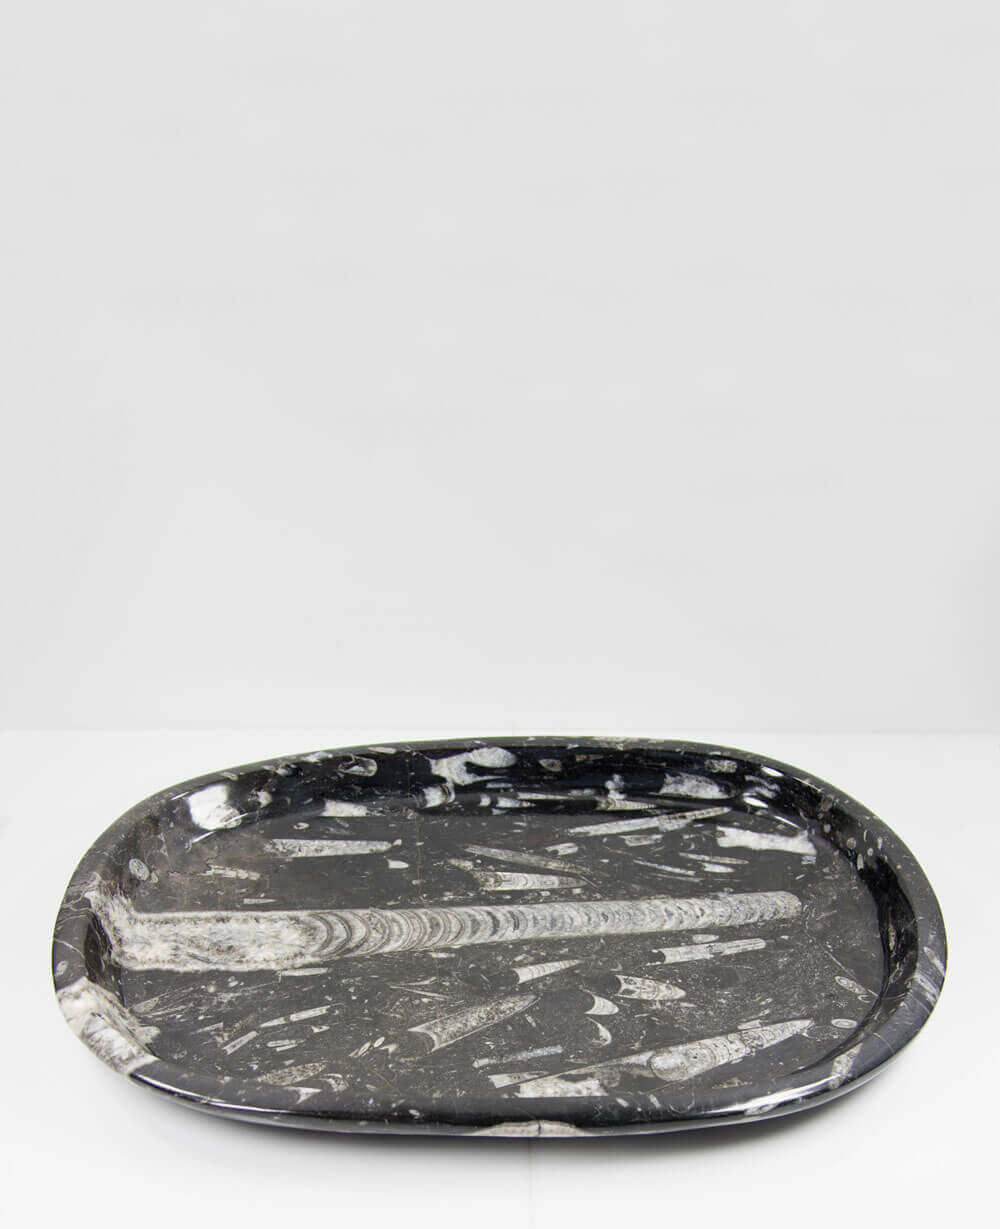 A stunning hand-crafted Devonian marble fossil and quartz mineral bowl for sale for luxury dining measuring 559mm